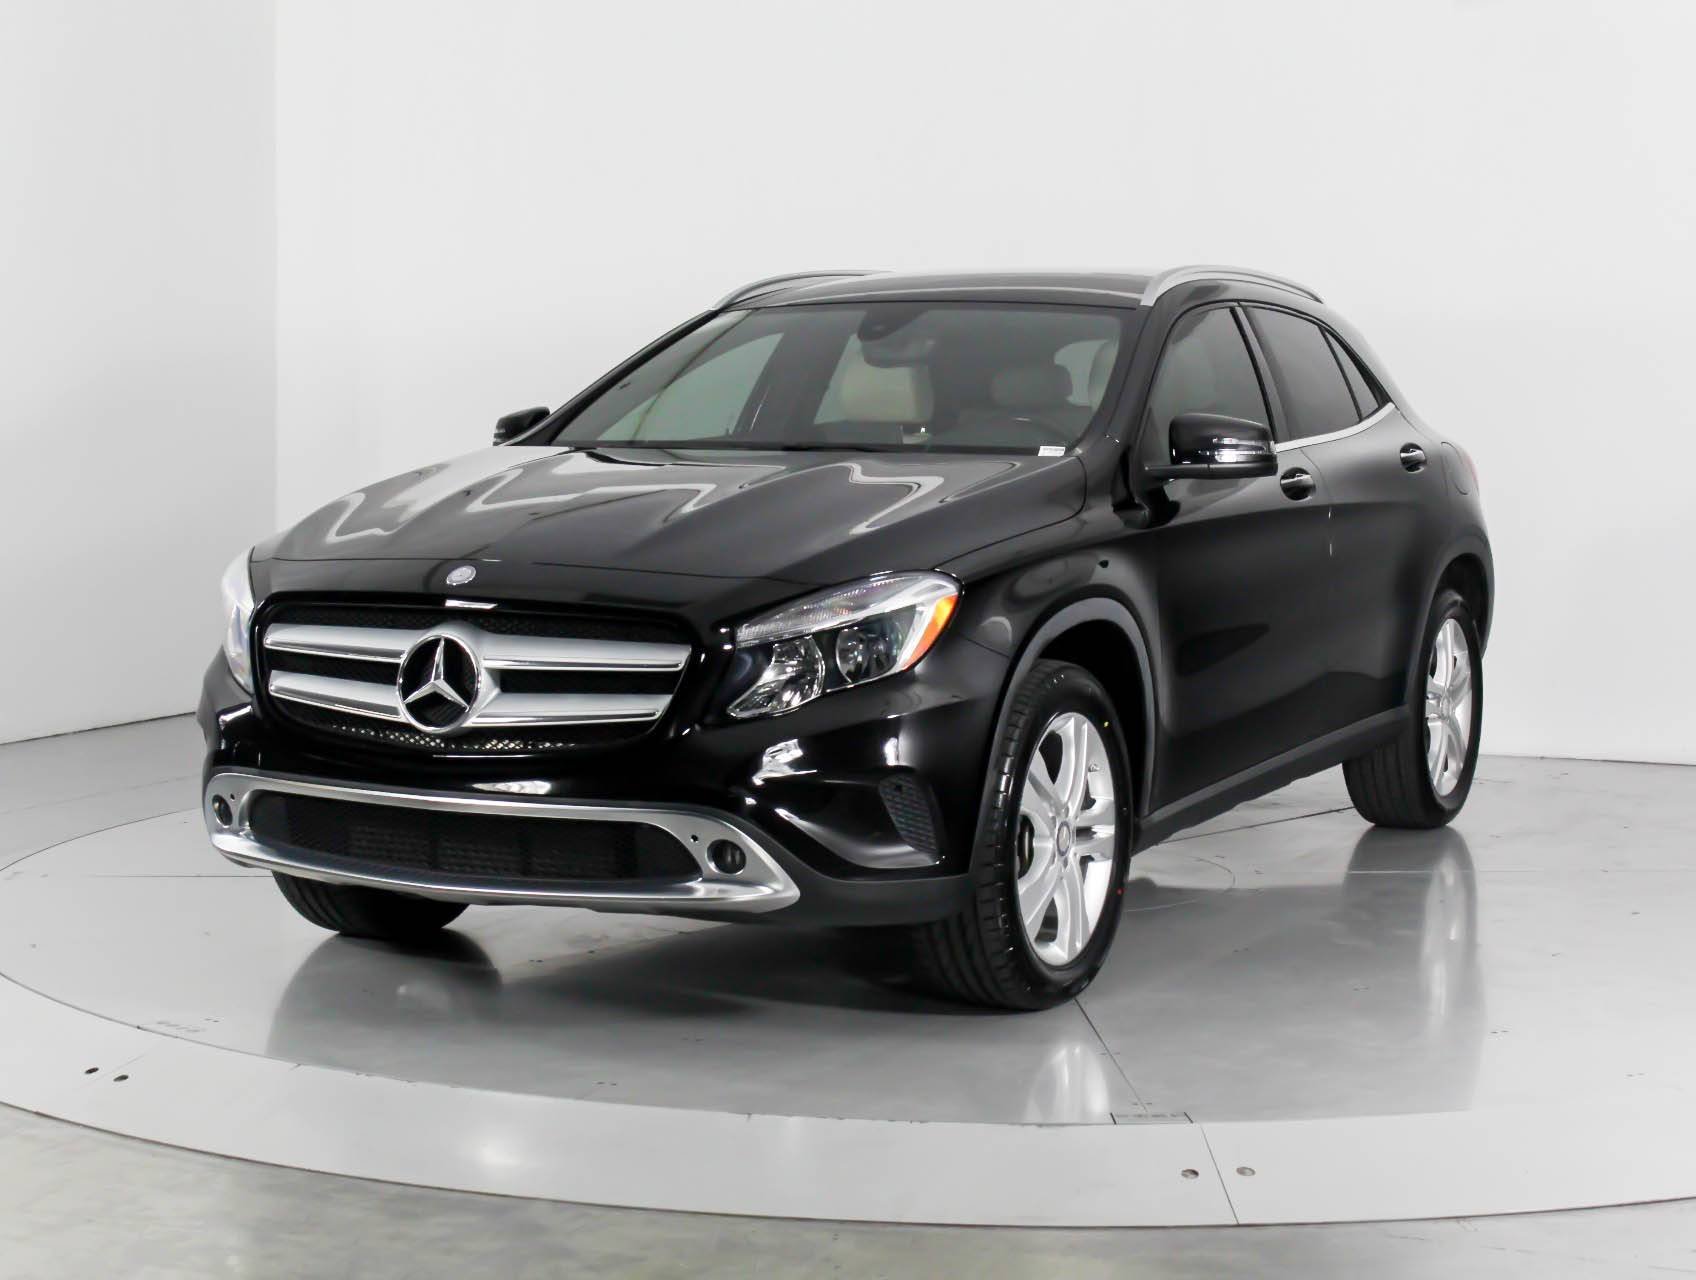 Used 2016 MERCEDES-BENZ GLA CLASS GLA250 for sale in WEST PALM | 103334